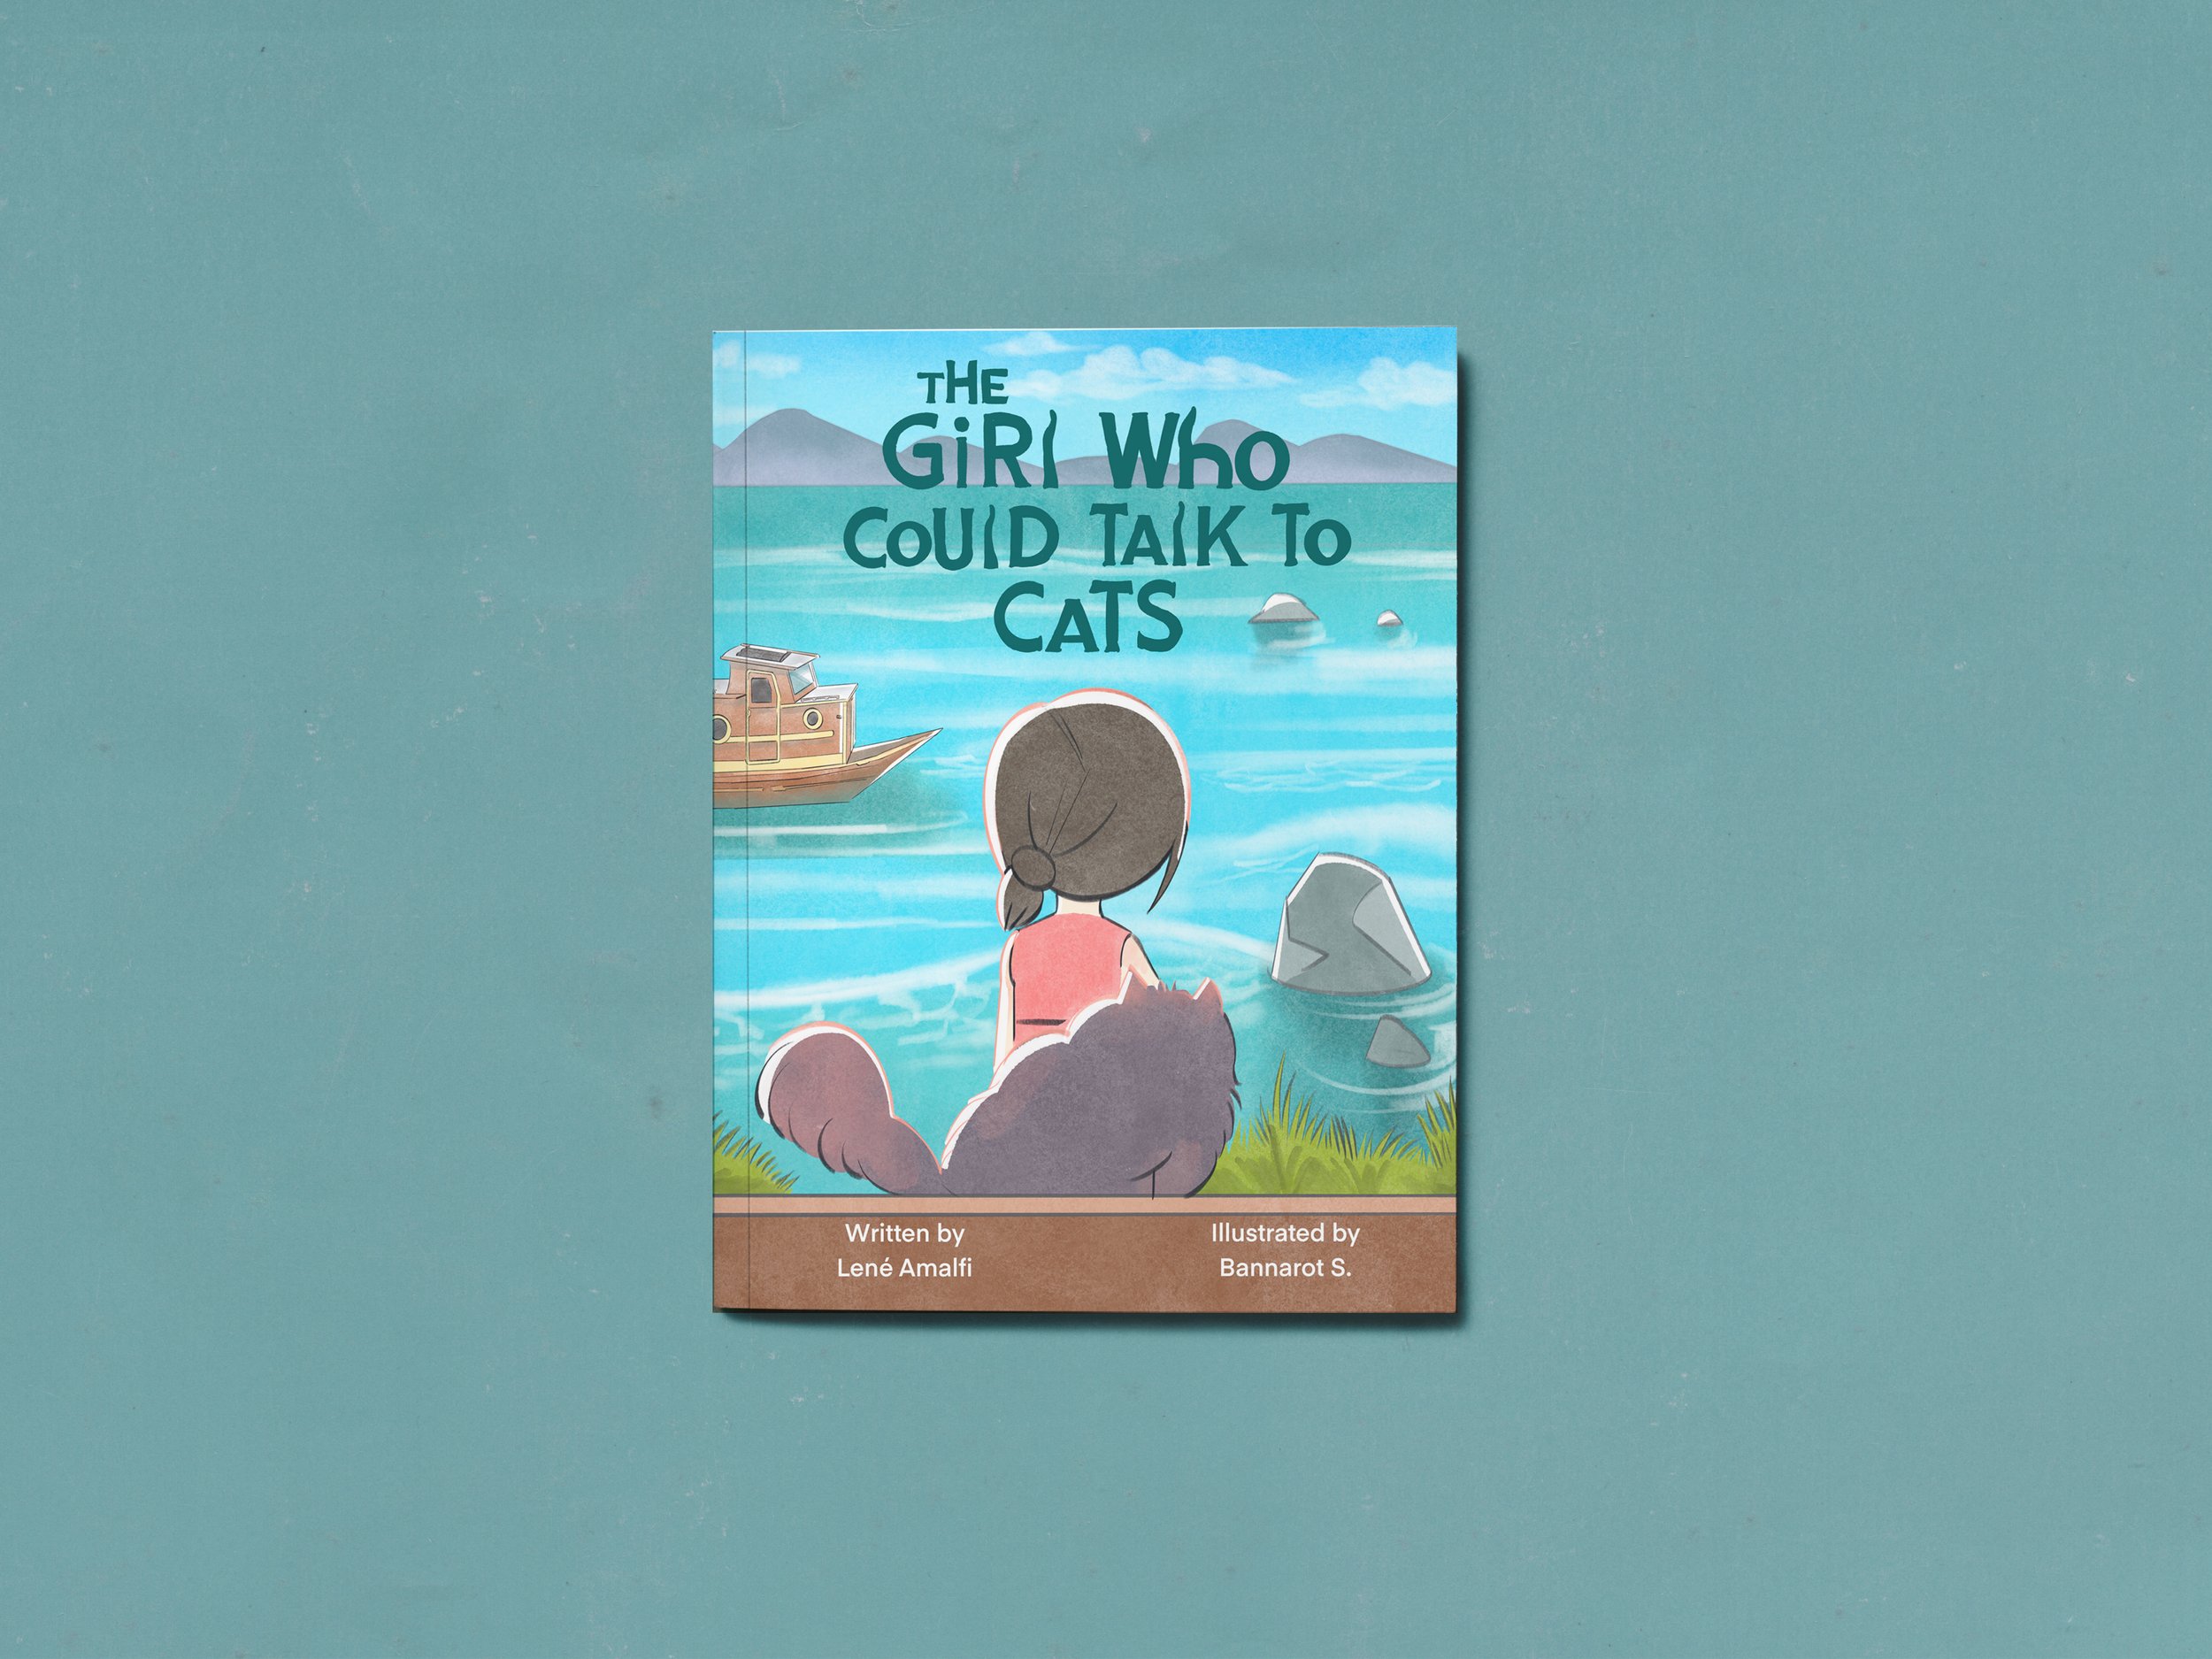 A5-Book-MockUp-The_Girl_Who_Could_Talk_To_Cats.jpg